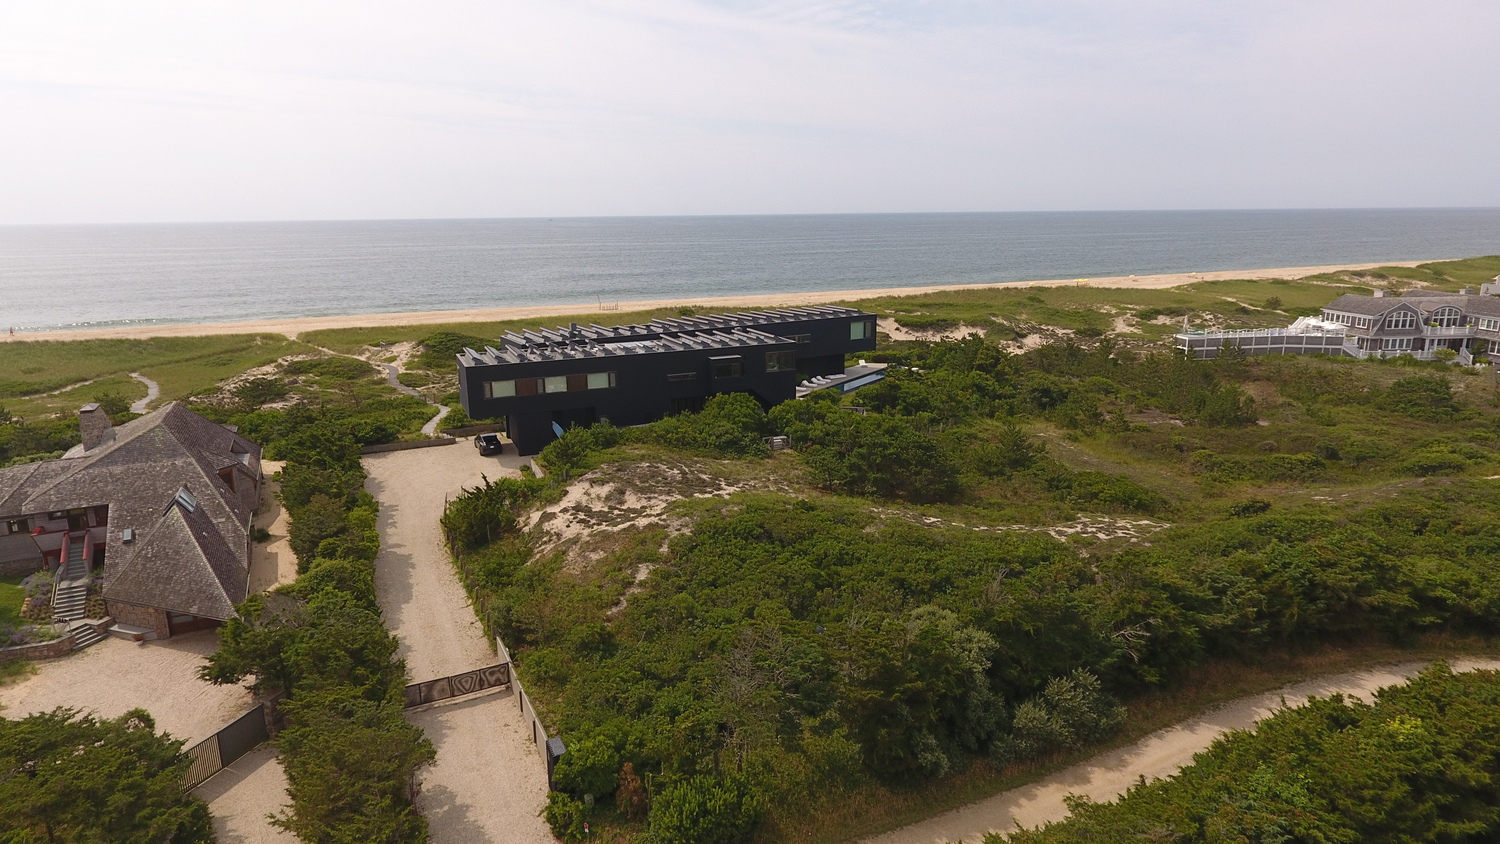 The property at 11 Beach Plum Court was the second largest water user in East Hampton Town over the last year.